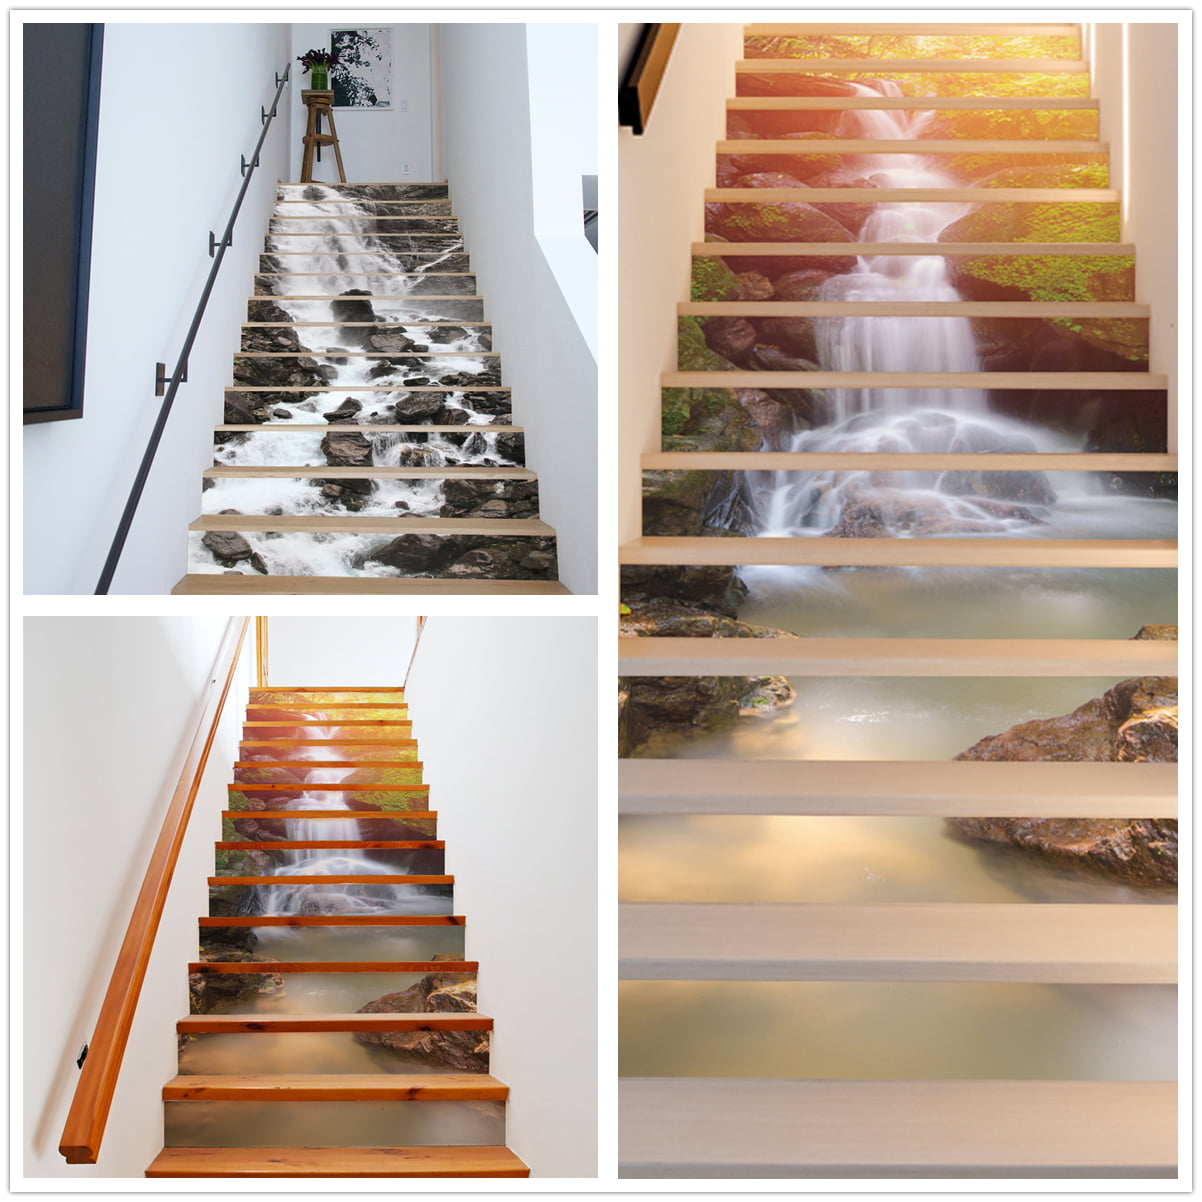 3D Stair Riser Staircase Stickers Mural PVC Wall Tiles Decals Self Adhesive Home